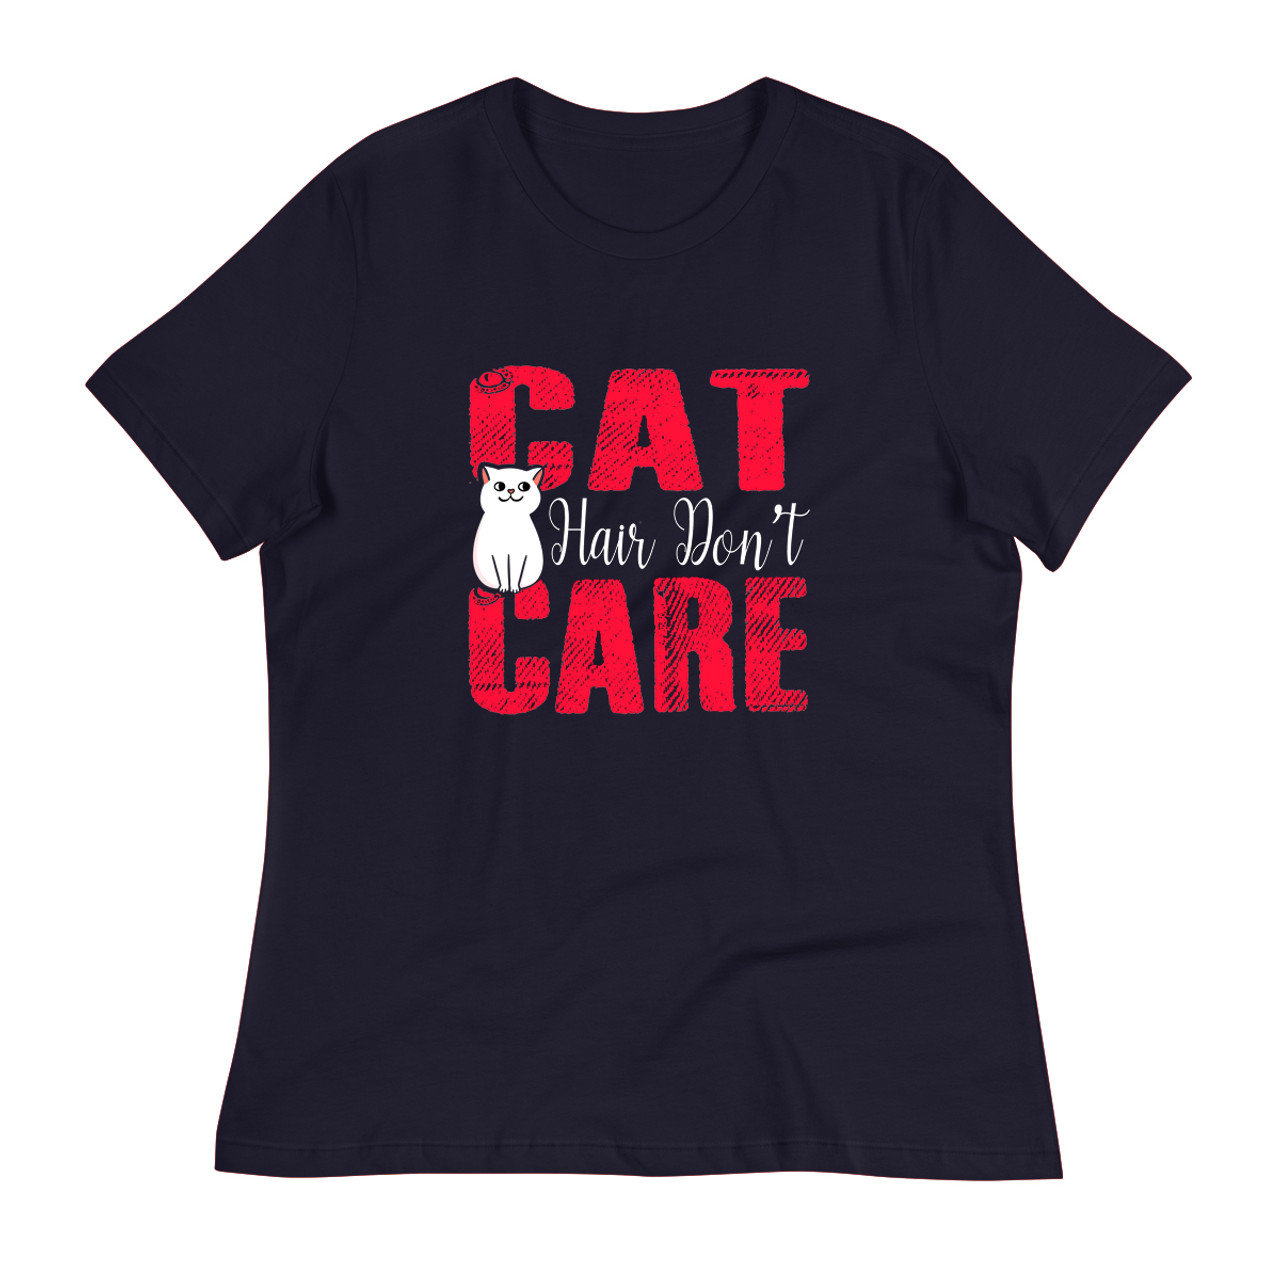 Navy Women's Relaxed T-Shirt - Bella + Canvas 6400  Cat Hair Don't Care